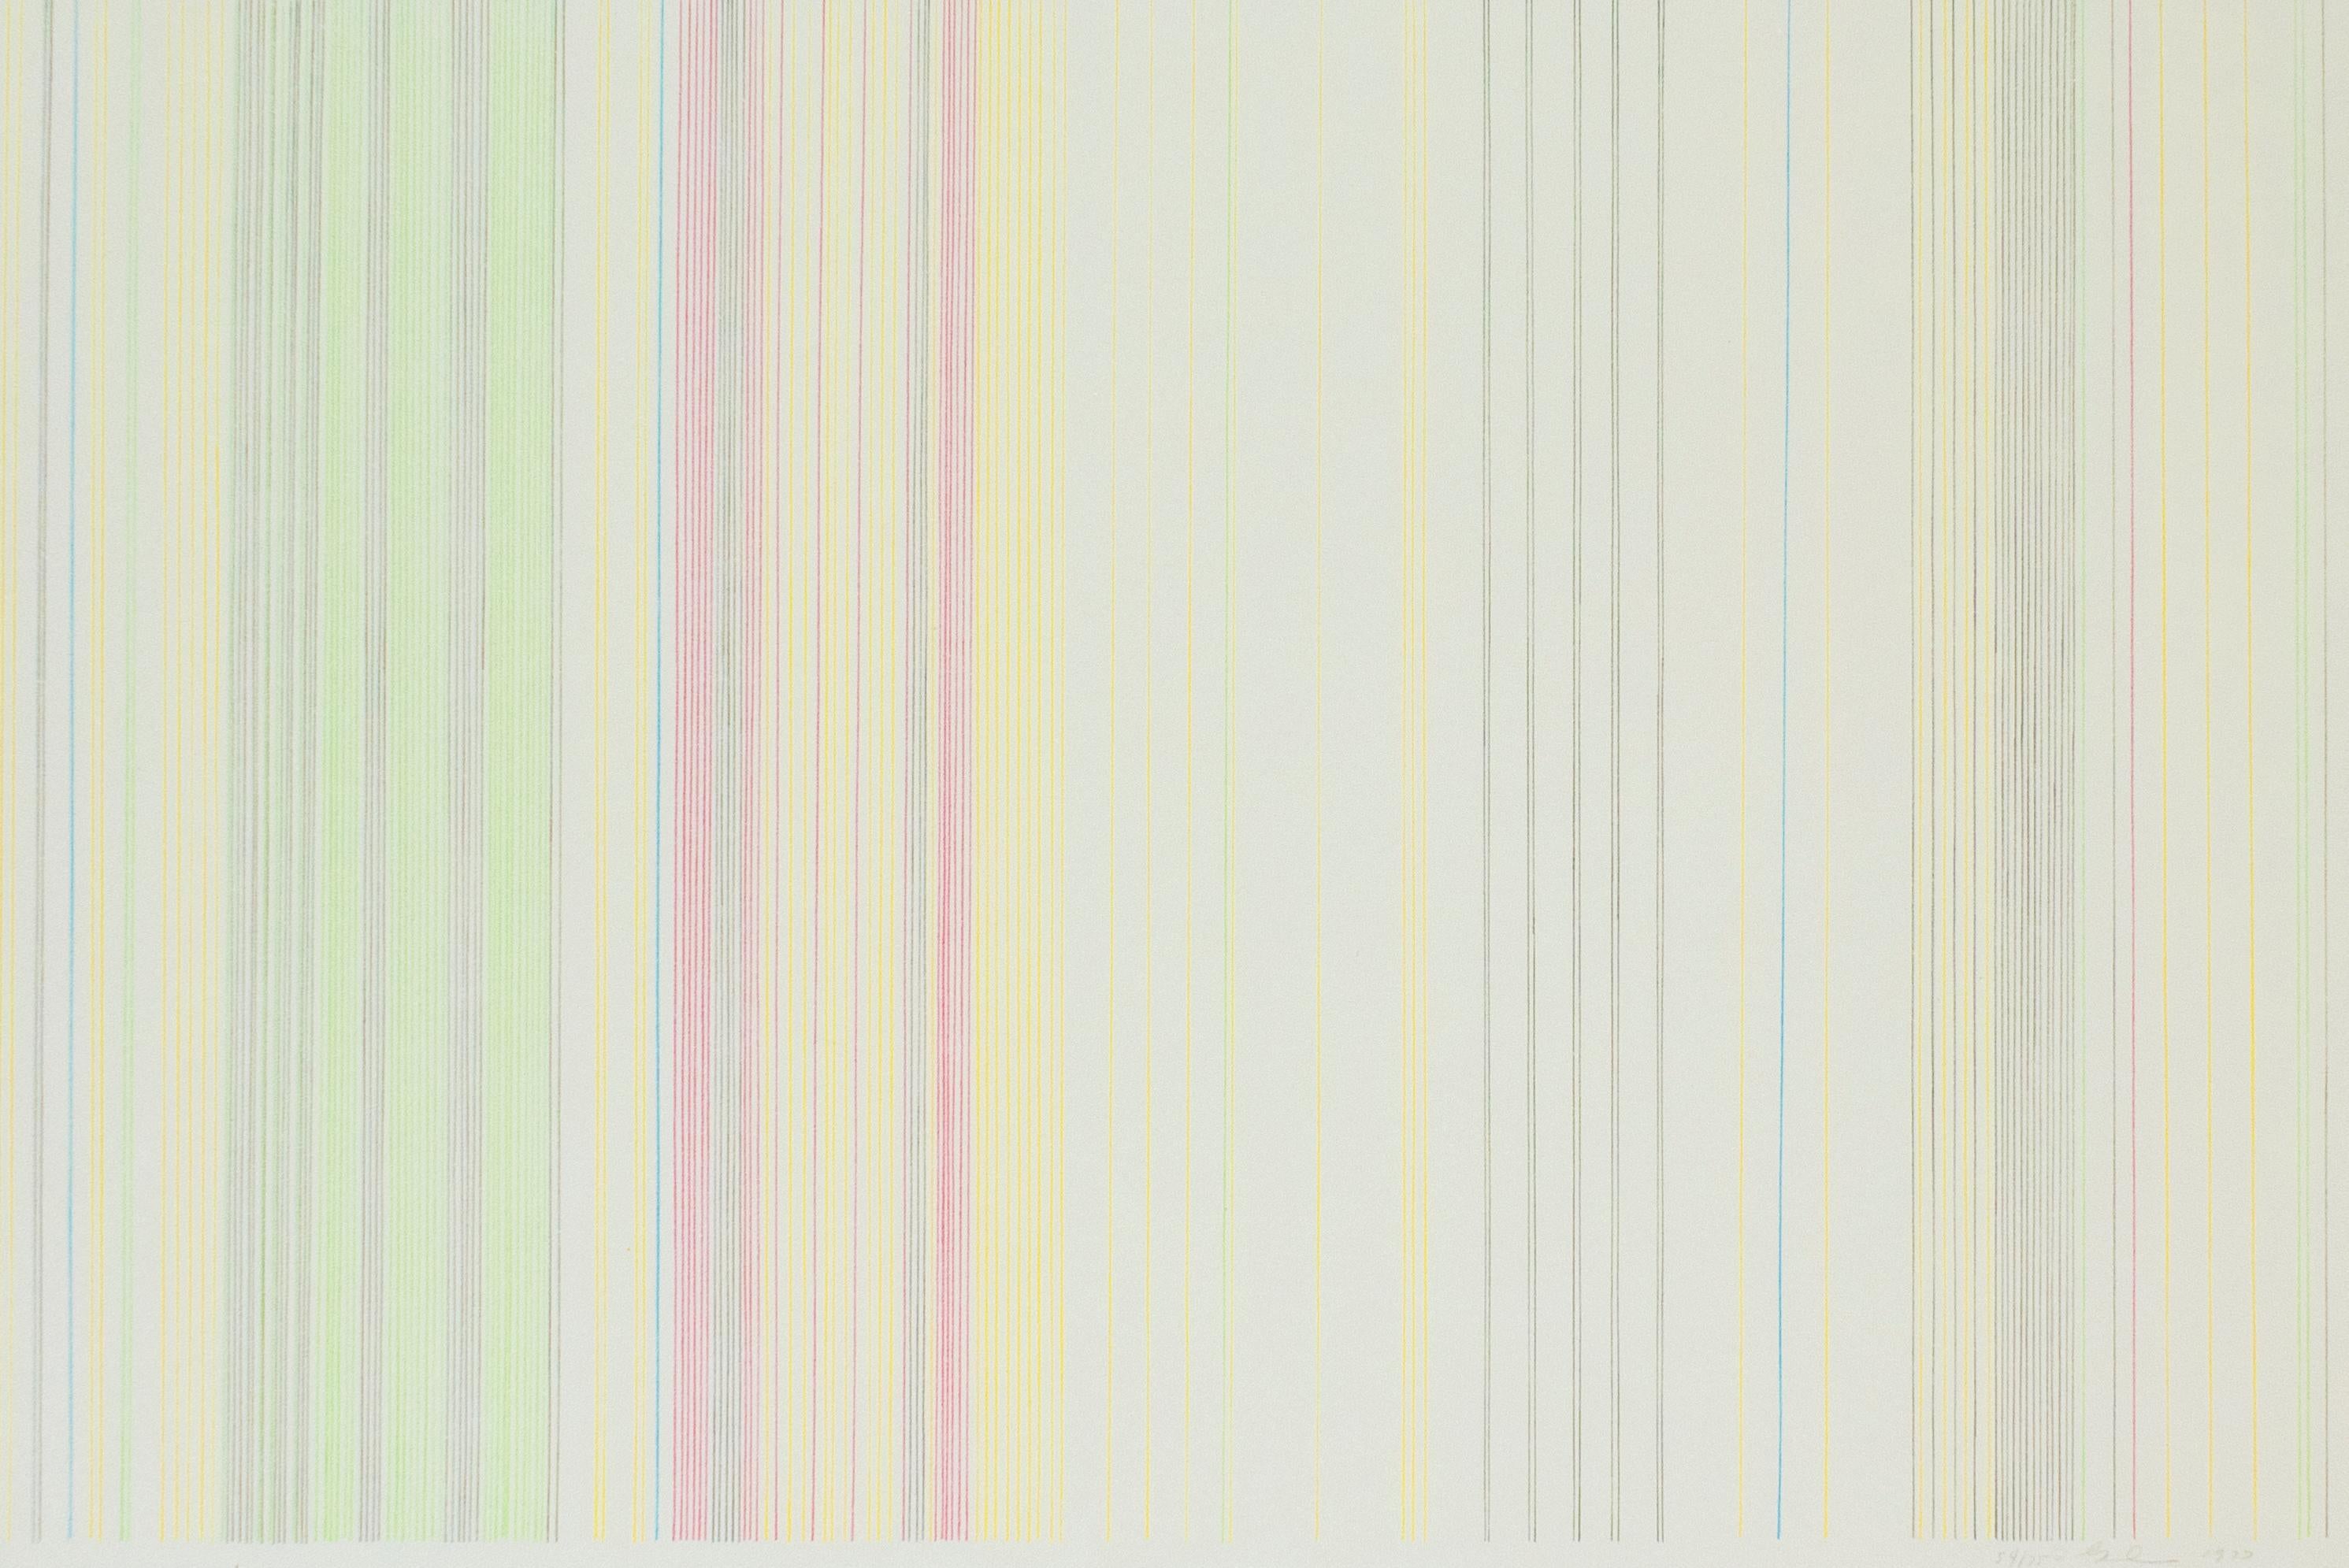 Tightrope: abstract modern minimalist color field drawing with rainbow colors - Beige Print by Gene Davis